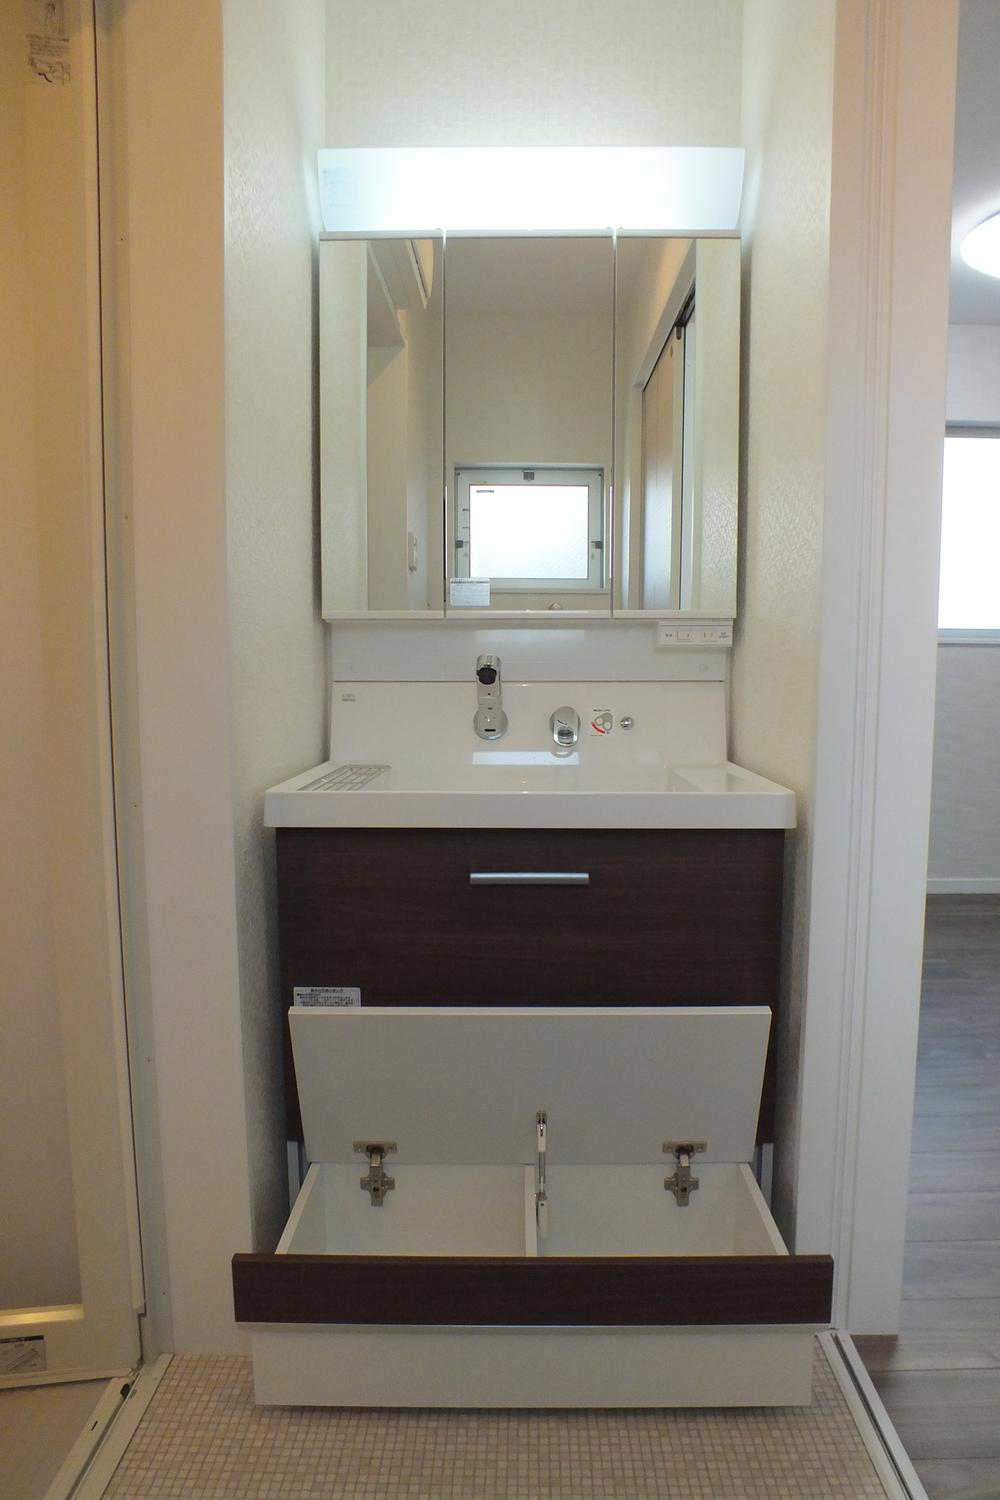 Wash basin, toilet. With springboard of children (has become a storage open the springboard) to vanity is, Kagamiura storage ・ With shampoo dresser! (The photograph is the same specification image)